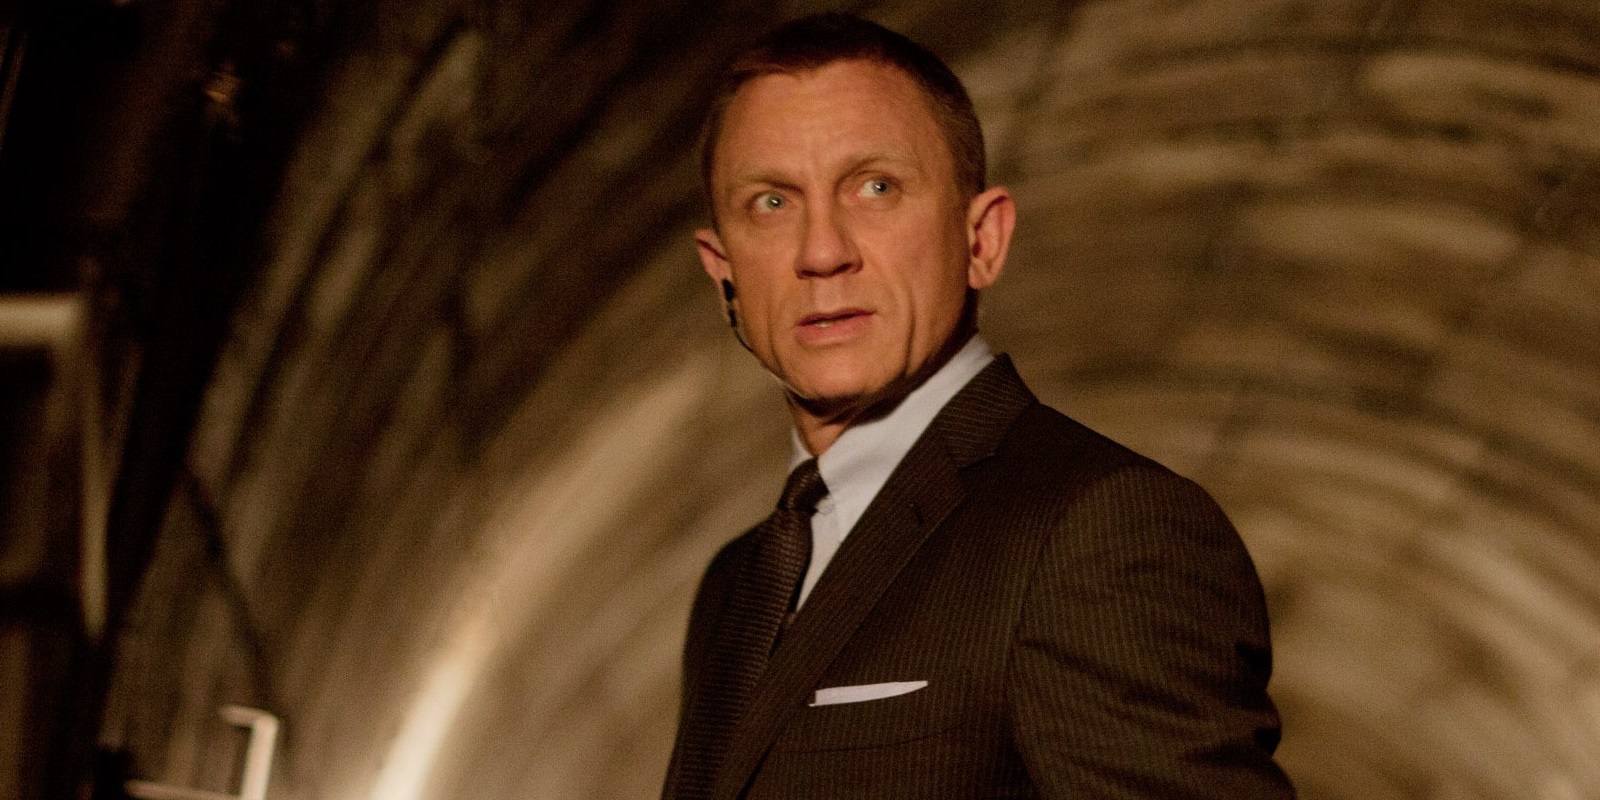 Daniel Craig Opens Up About His James Bond Challenges and Future Roles